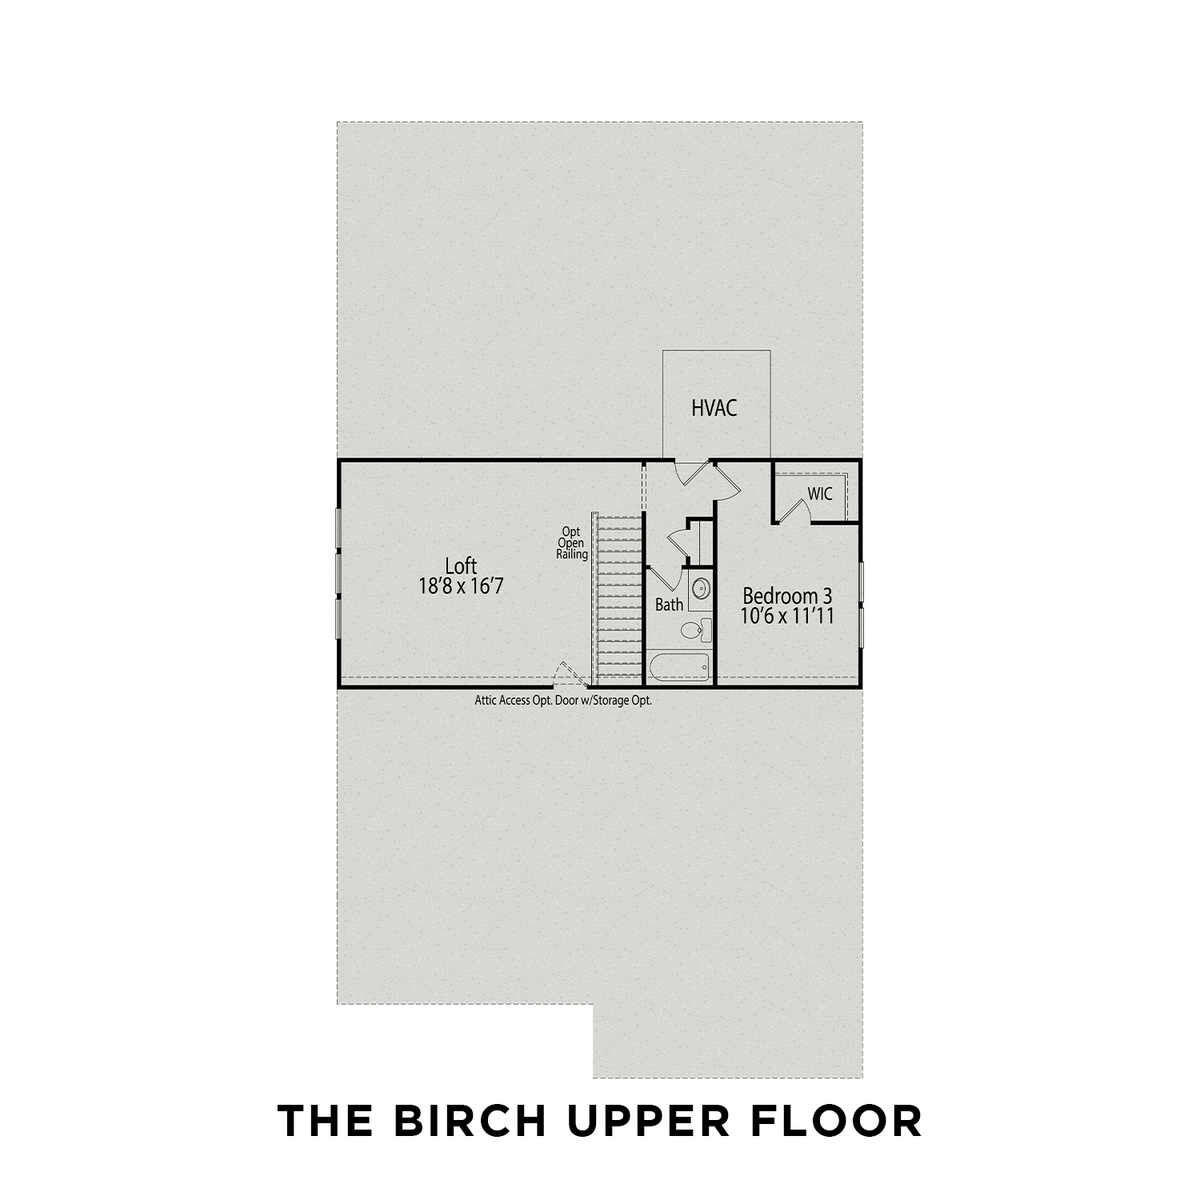 2 - The Birch A buildable floor plan layout in Davidson Homes' Carellton community.